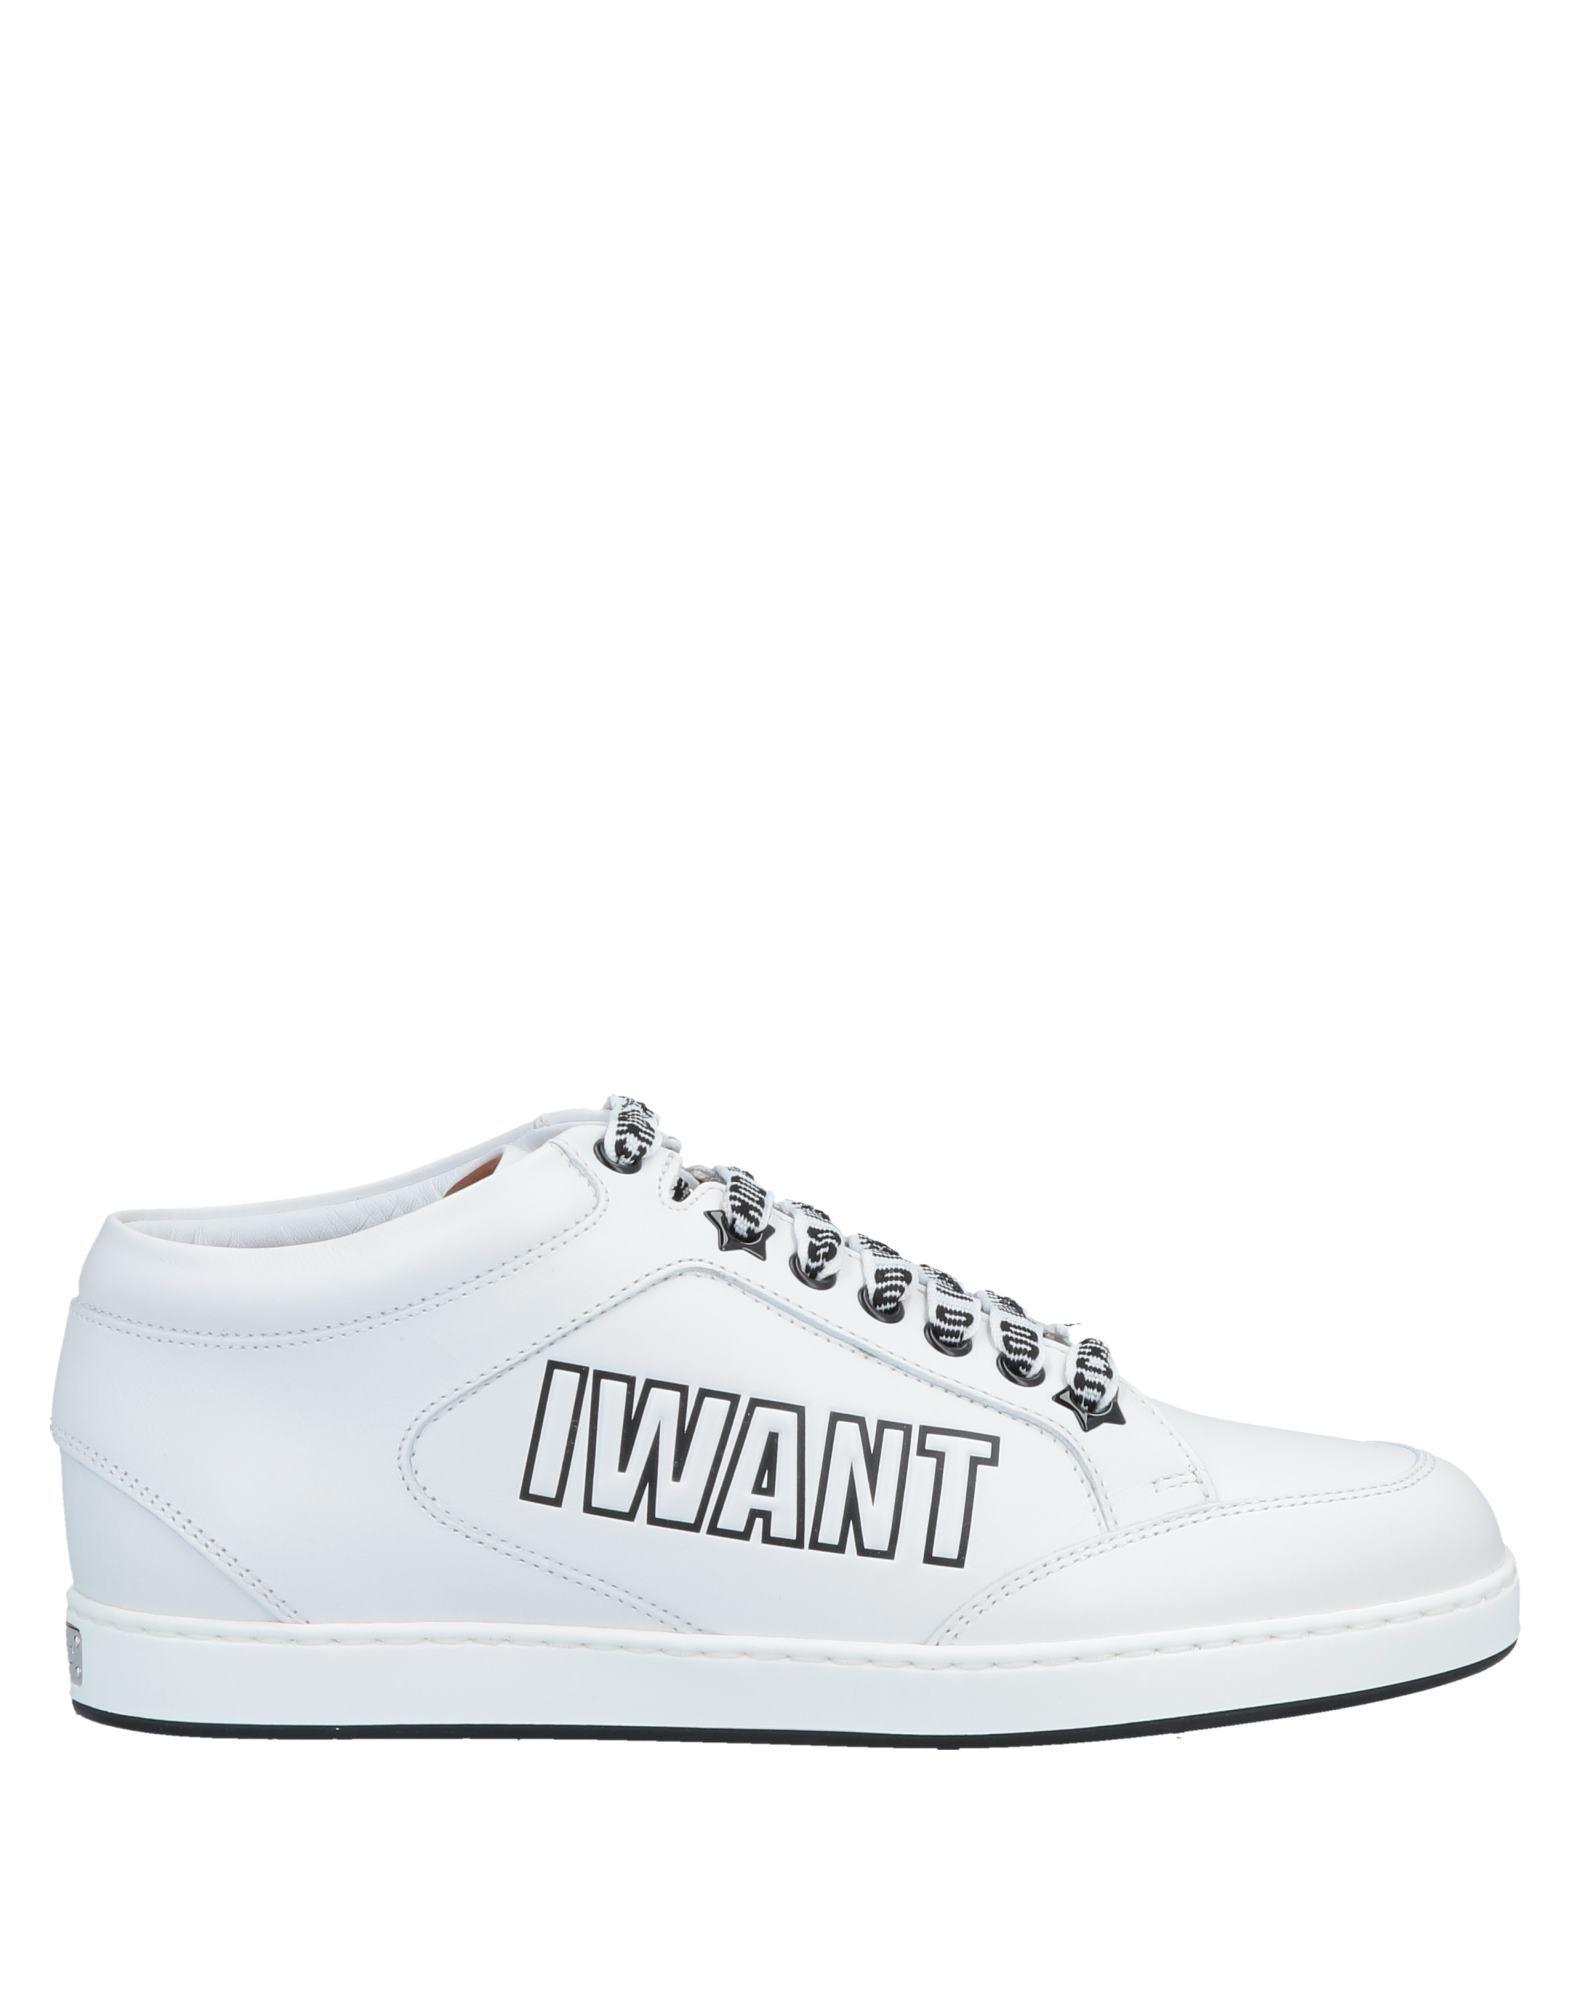 Jimmy Choo Women's Shoes Leather Trainers Sneakers Miami in White ...